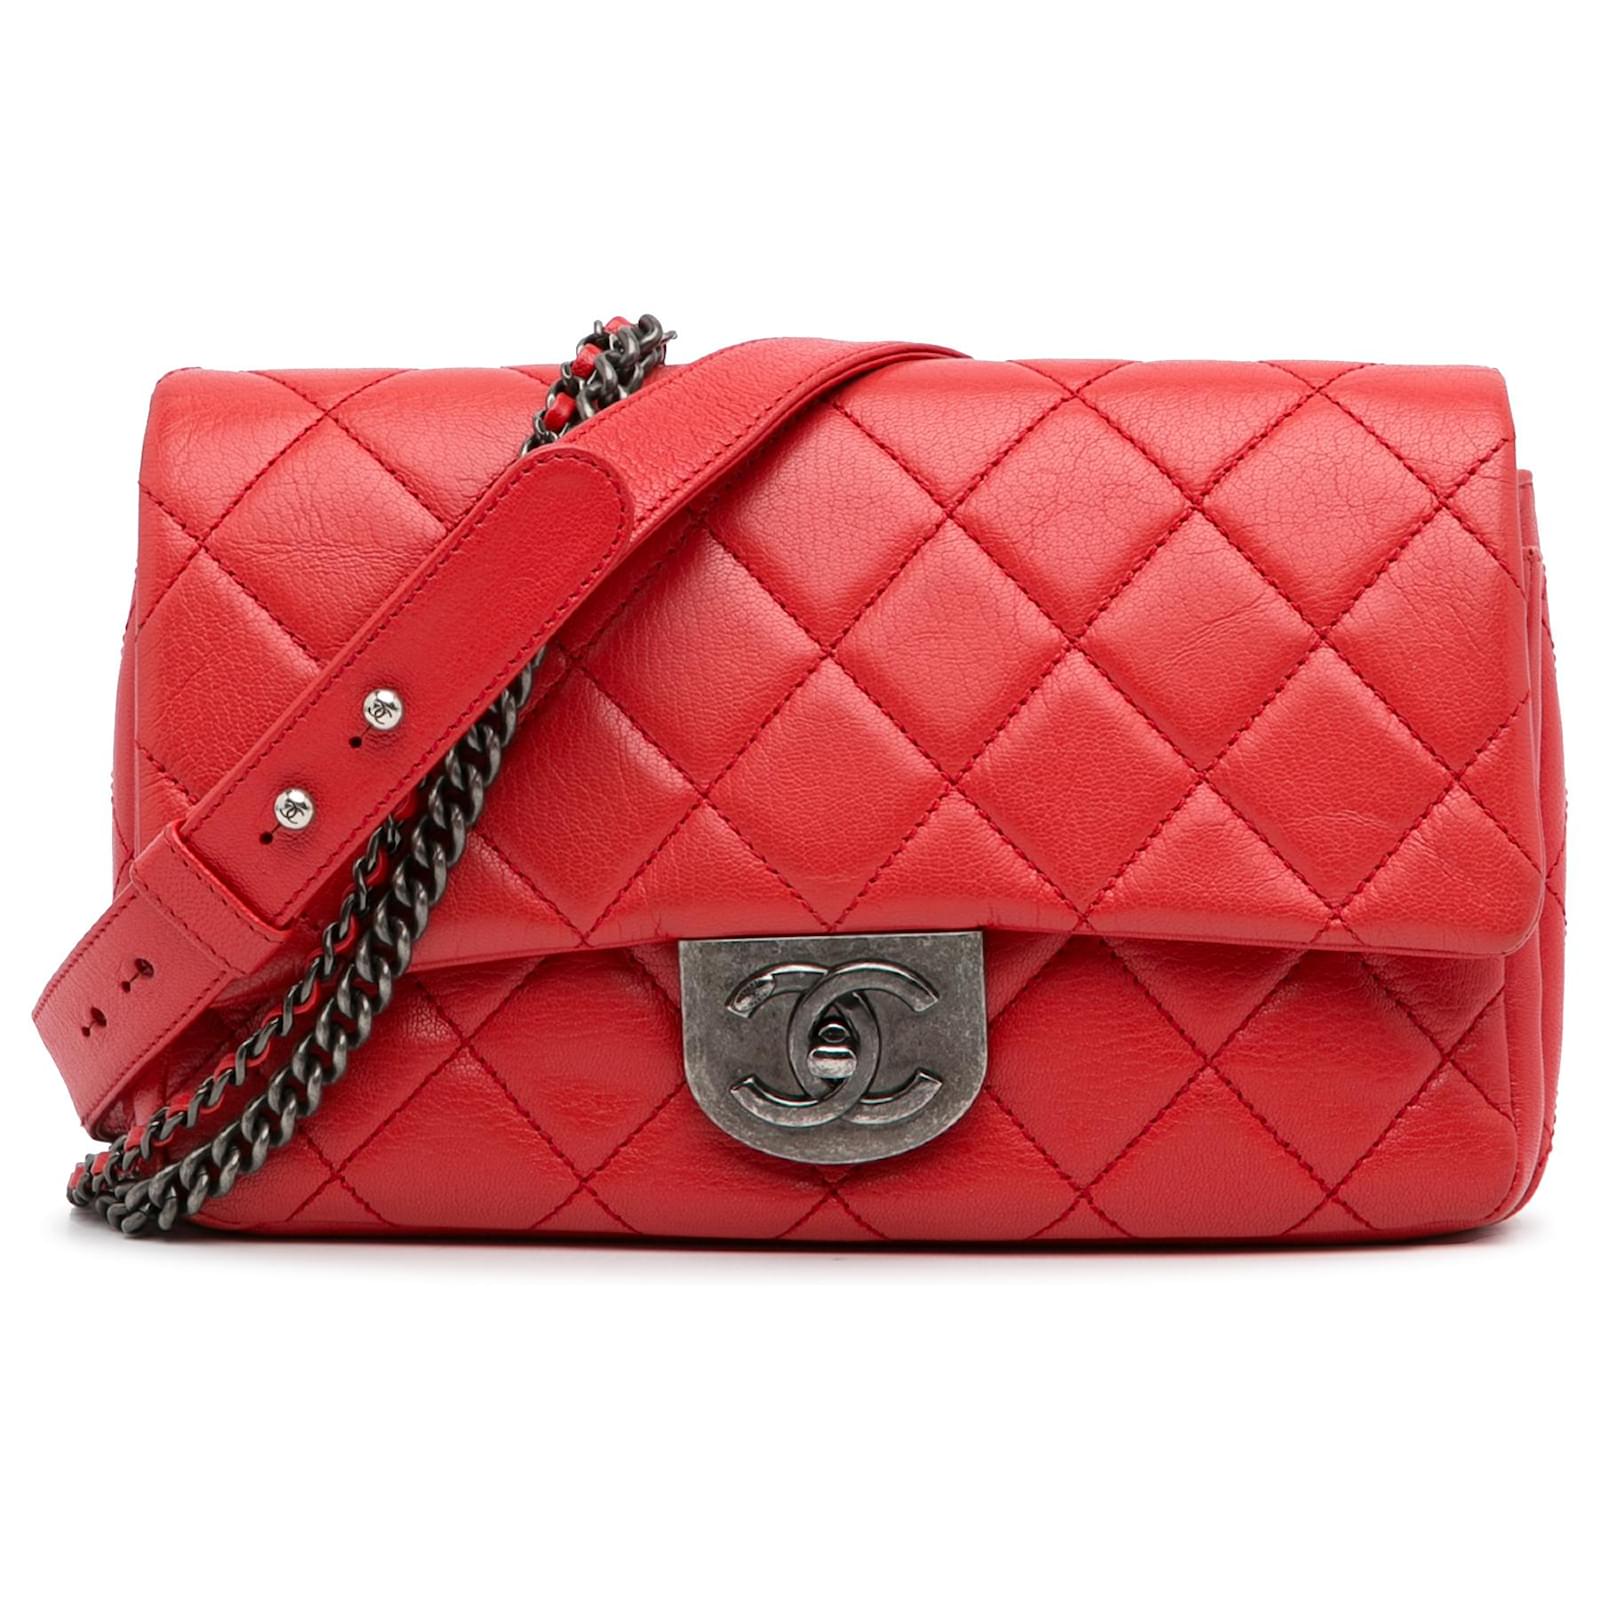 Chanel Red Small Goatskin lined Carry Waist Chain Flap